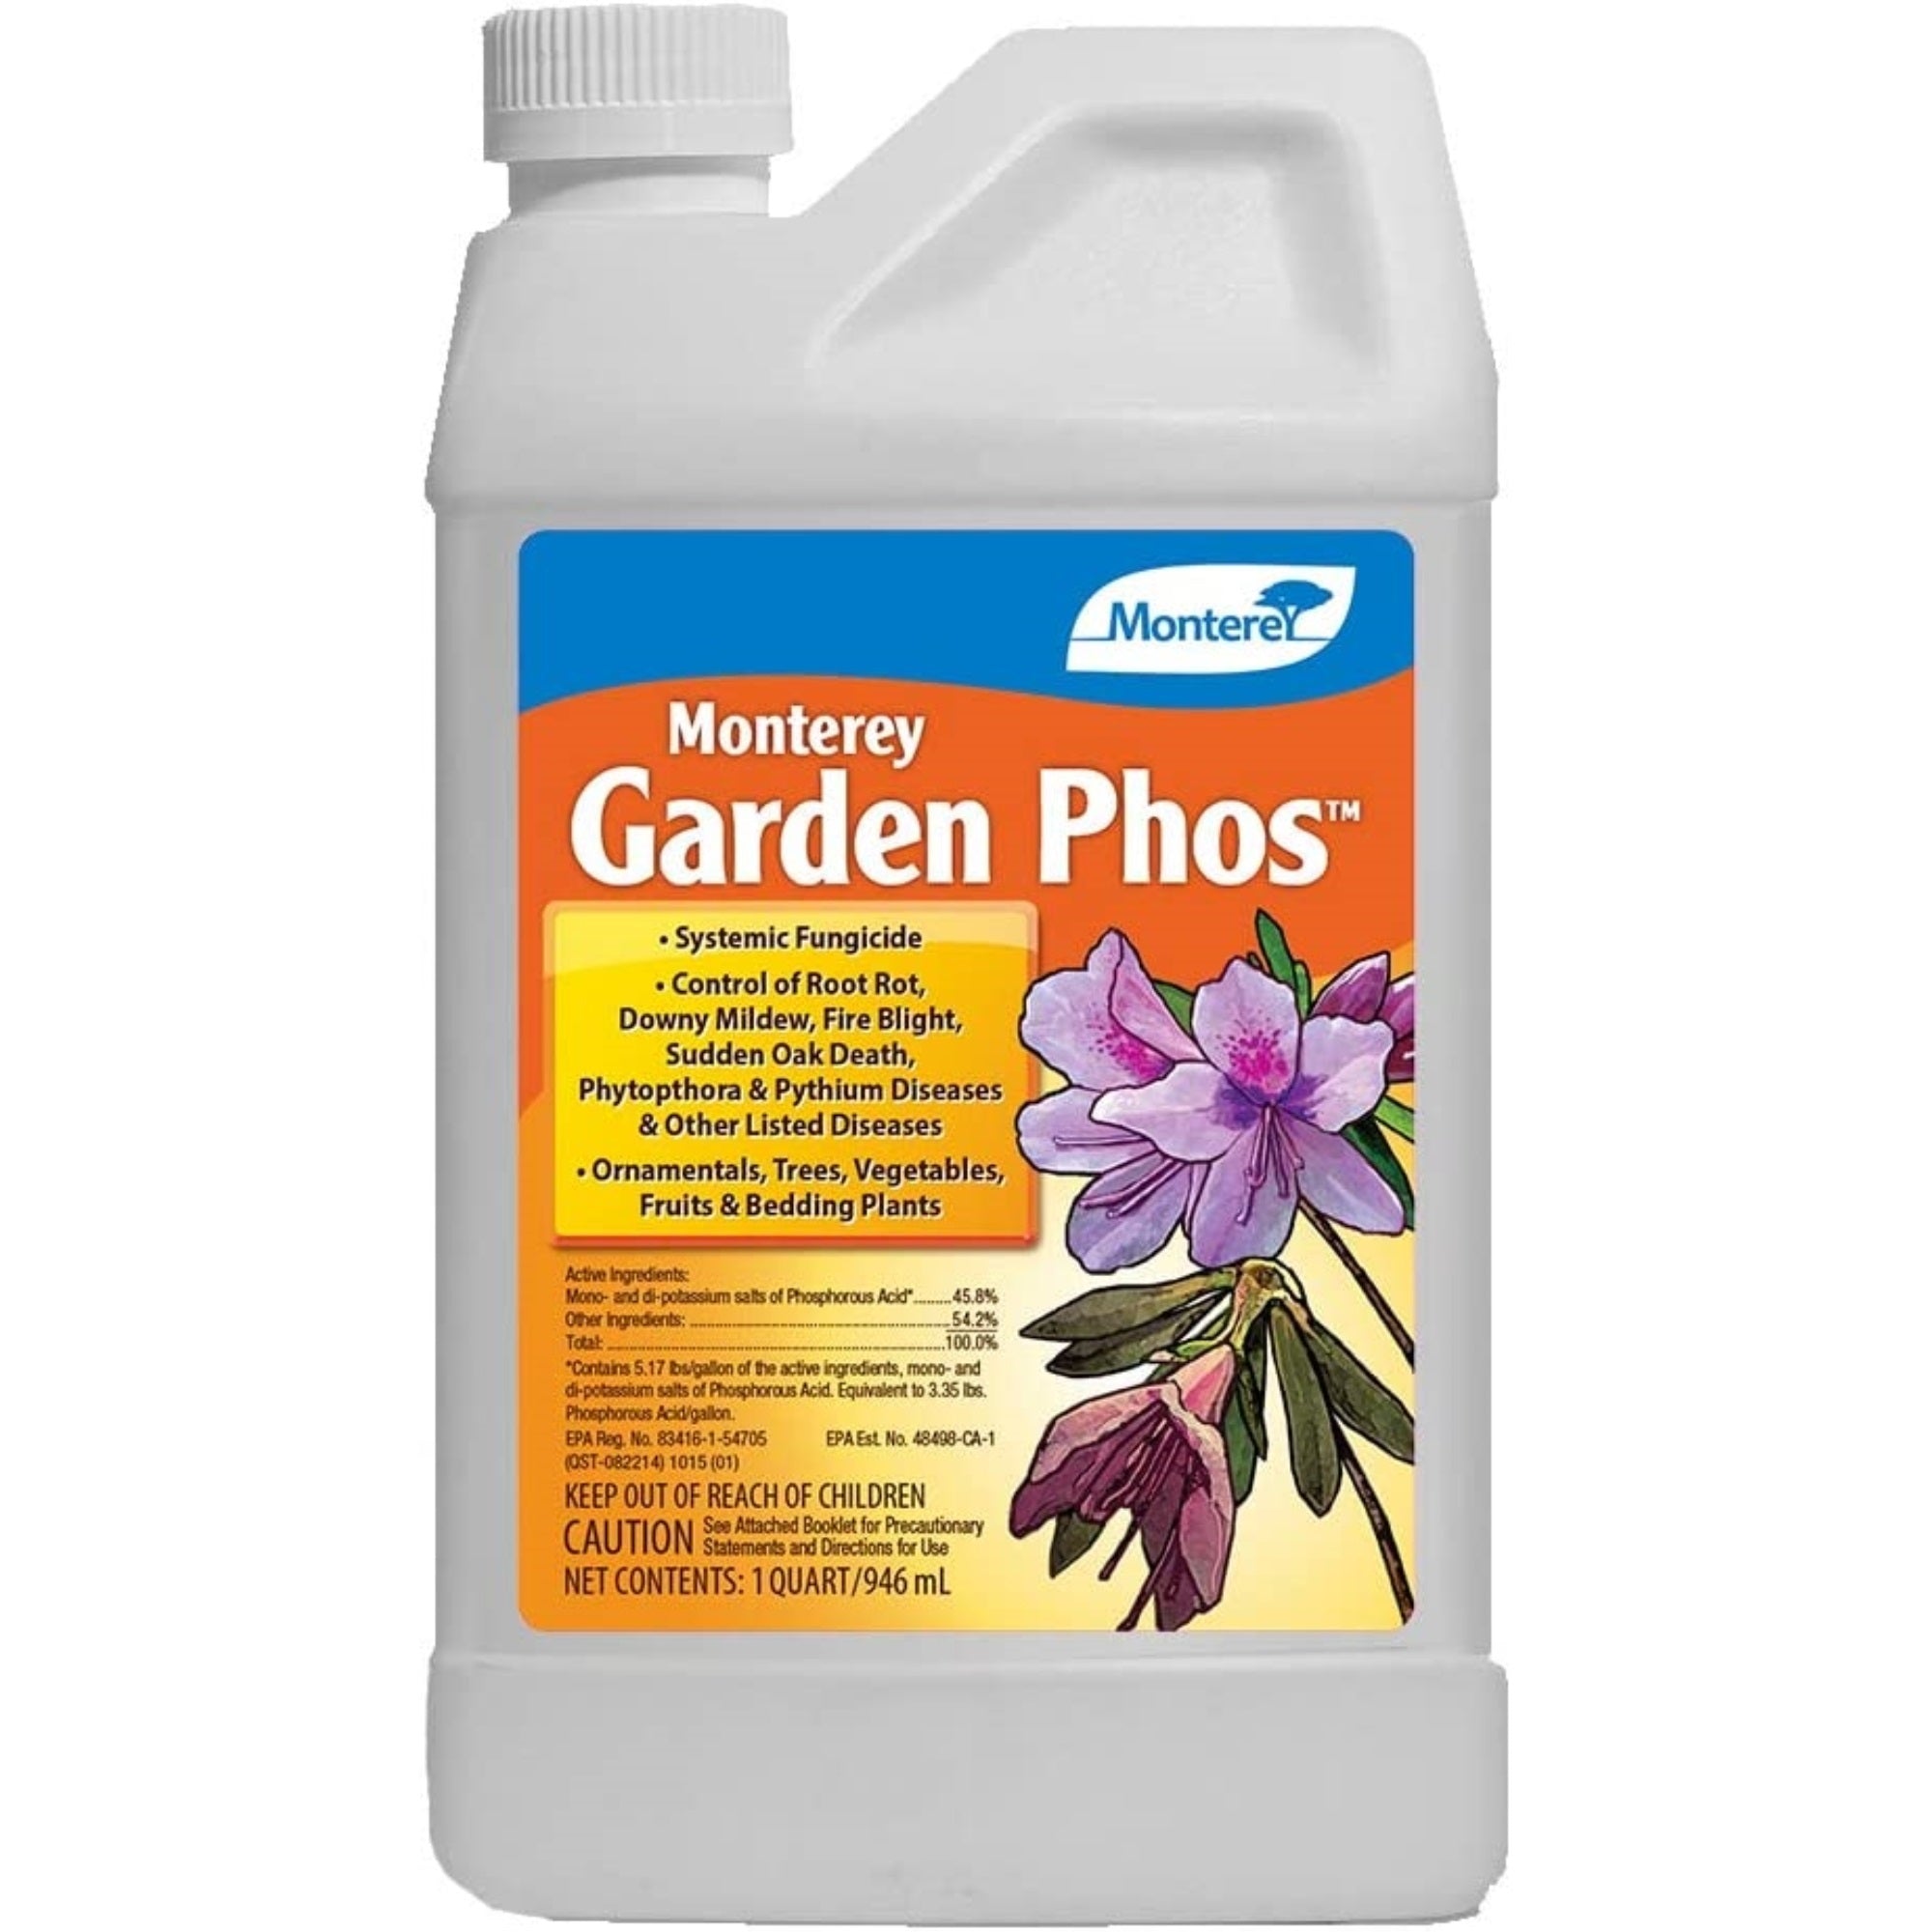 Monterey Garden Phos Systemic Fungicide Concentrate, 32 oz